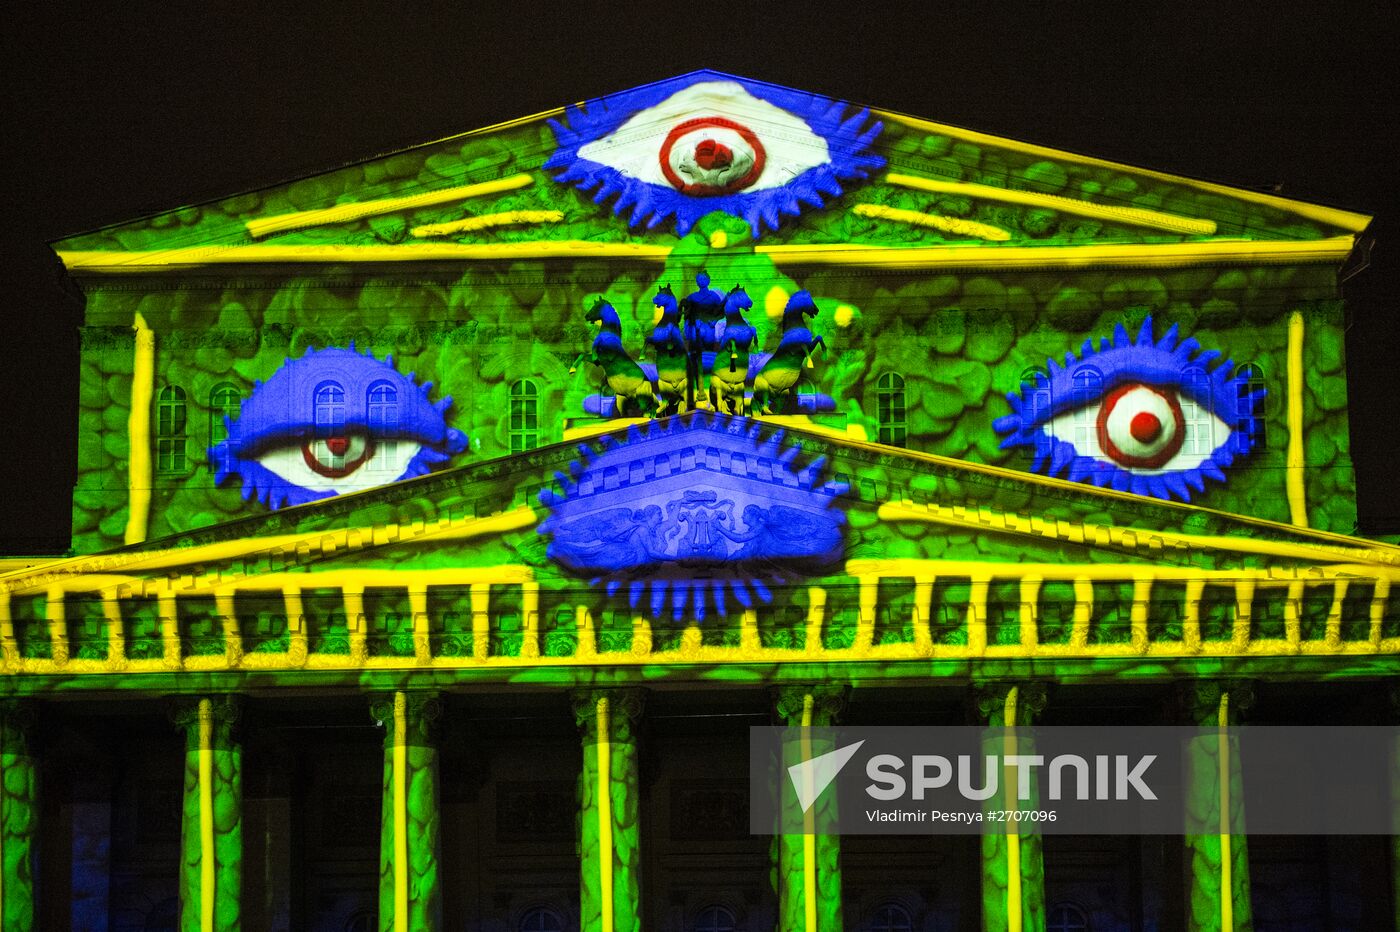 Art Vision competition held as part of the Circle of Light Moscow International Festival